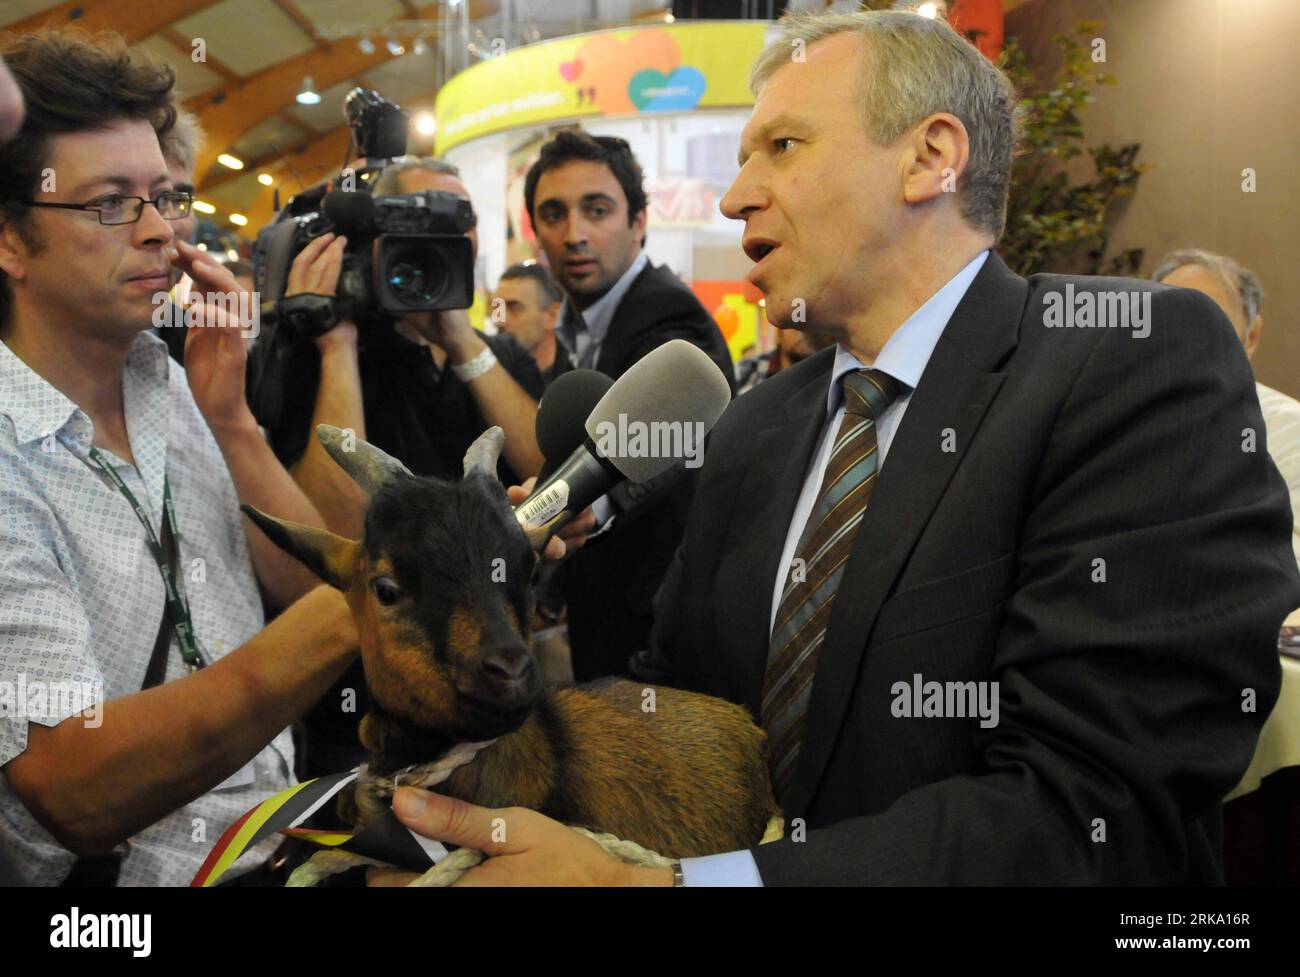 Bildnummer: 54250880  Datum: 24.07.2010  Copyright: imago/Xinhua (100725) -- LIBRAMONT, July 25, 2010 (Xinhua) -- Belgian Prime Minister Yves Leterme (1st R) receives interviews while carrying a little goat at the agricultural fair in Libramont, Belgium, July 24, 2010. The agricultural fair, lasting four days, opened in Libramont on Friday. (Xinhua/Wang Xiaojun)(axy) BELGIUM-LIBRAMONT-AGRICULTURE FAIR PUBLICATIONxNOTxINxCHN Wirtschaft Landwirtschaft Messe kbdig xcb 2010 quer  o0 Landwirtschaftsmesse, People, Politik    Bildnummer 54250880 Date 24 07 2010 Copyright Imago XINHUA  Libramont July Stock Photo